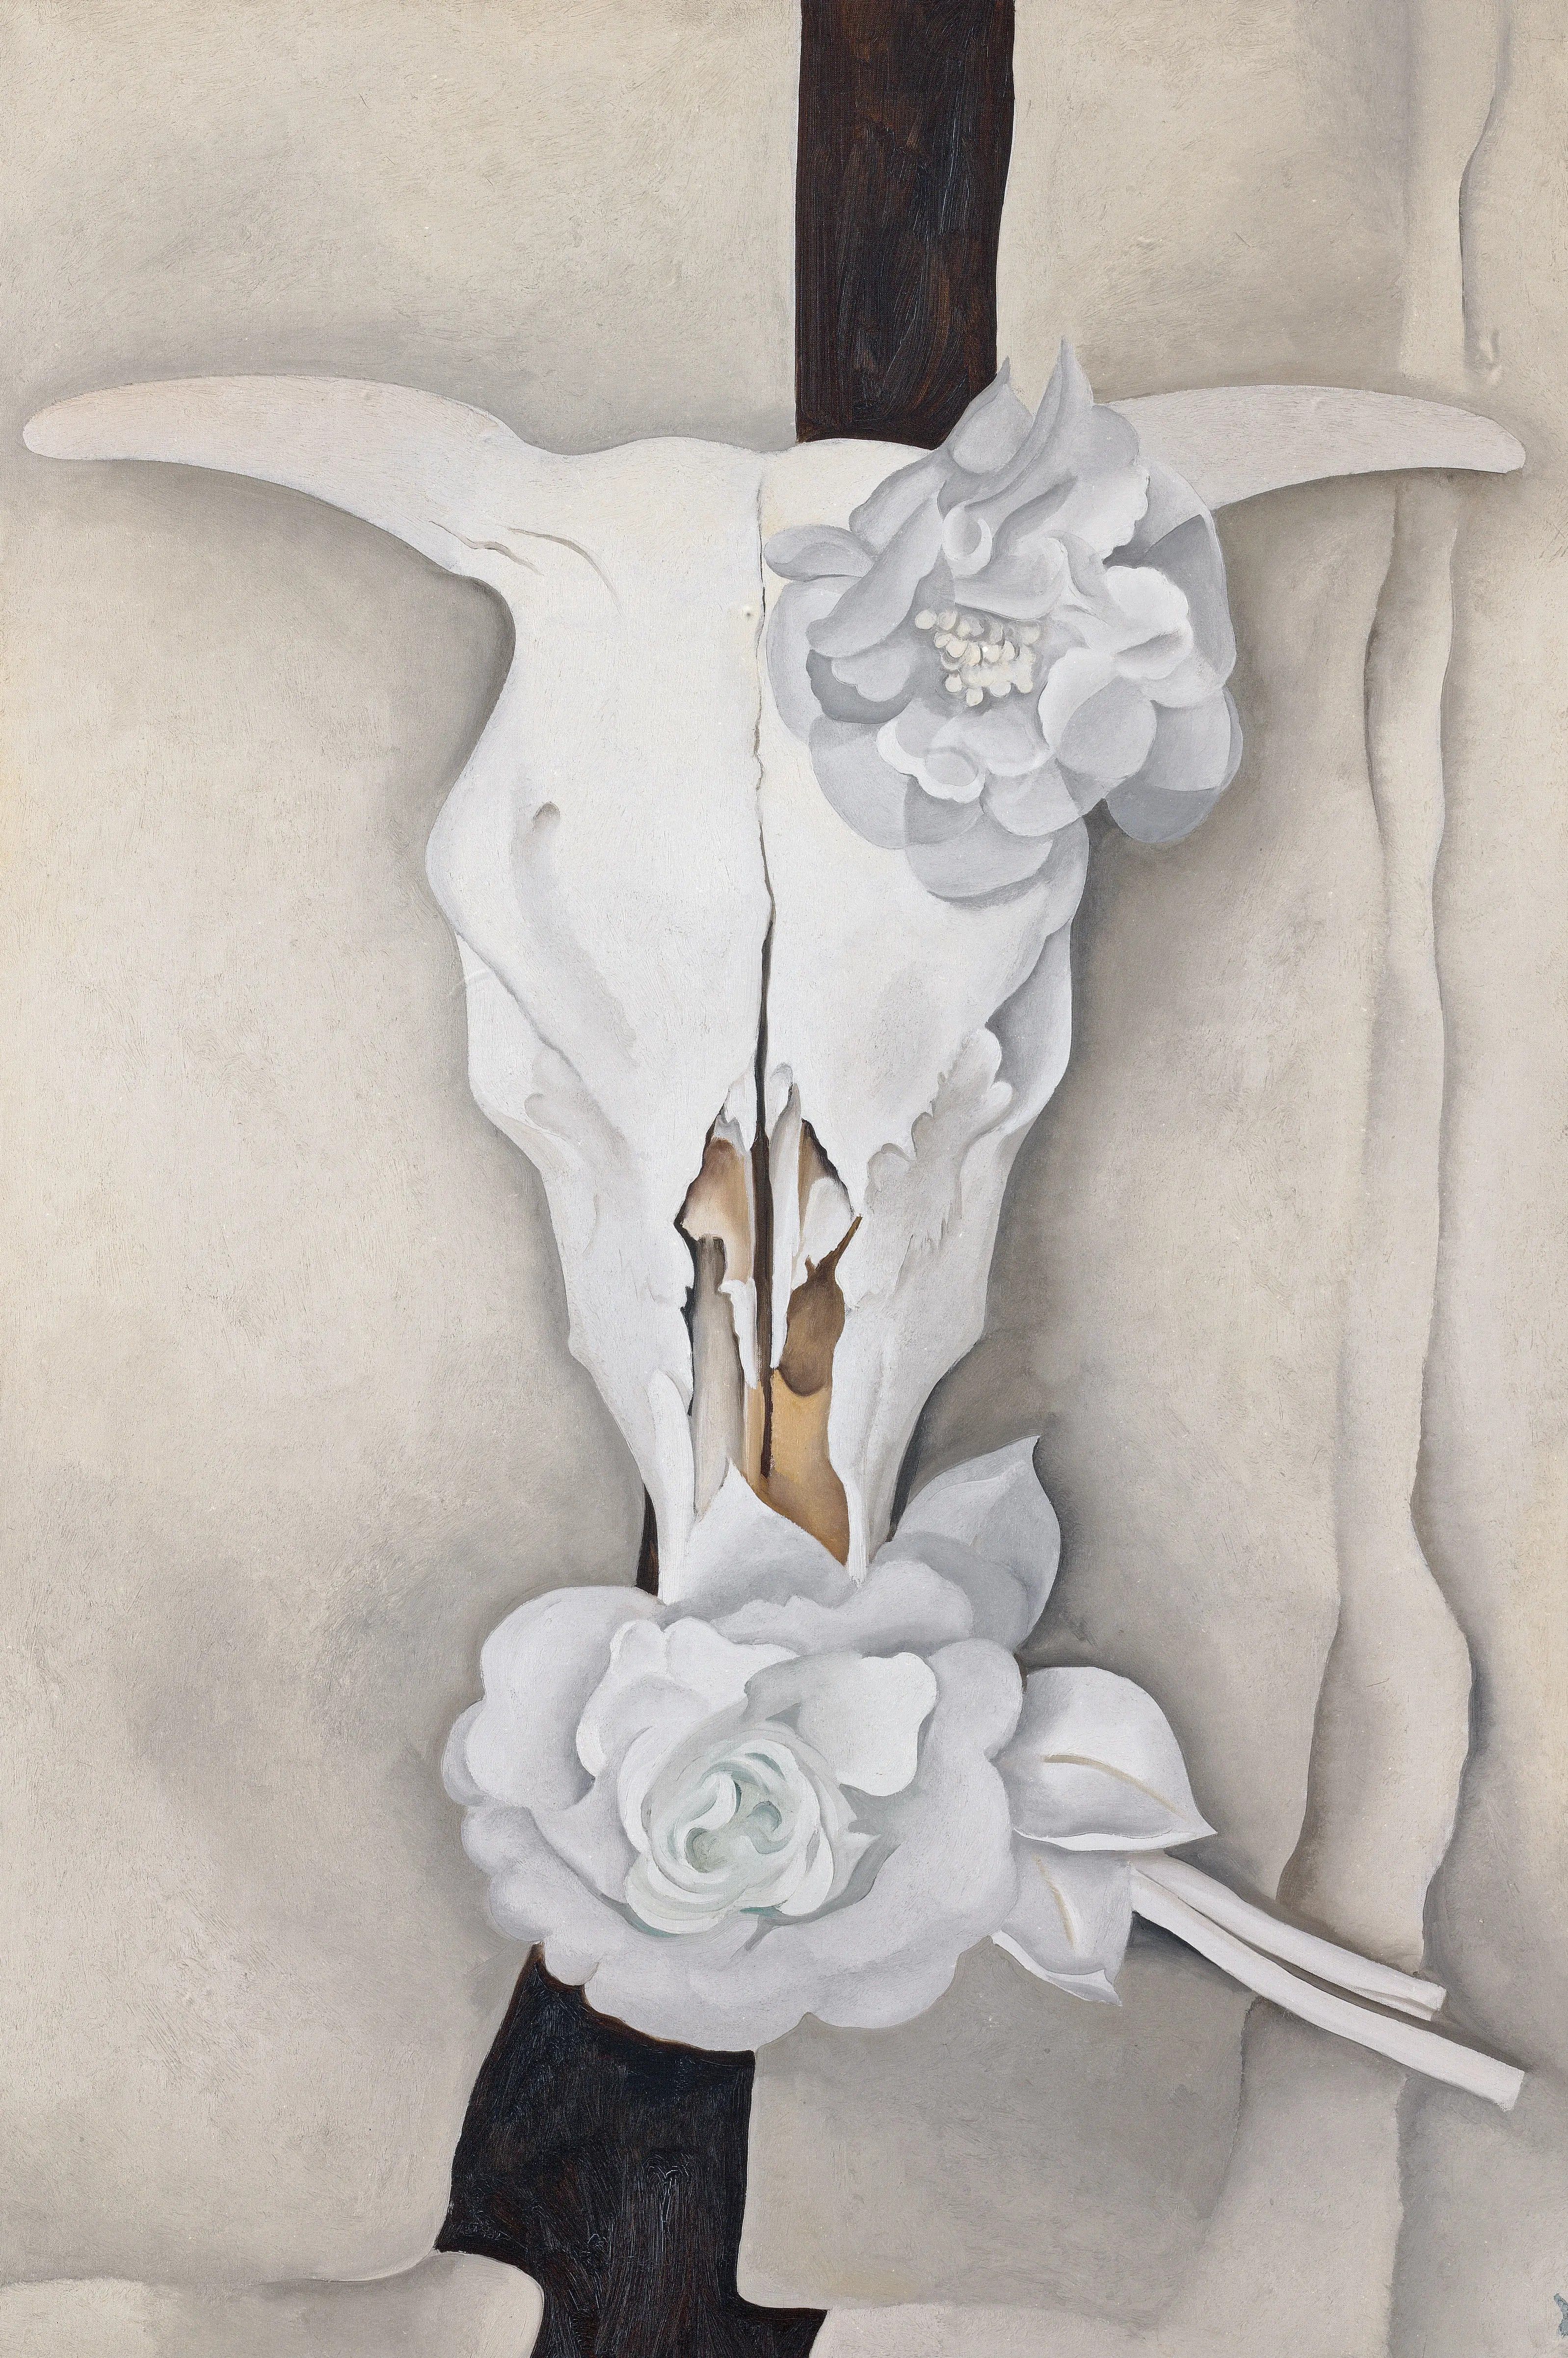 Georgia O'Keeffe. Cow’s Skull with Calico Roses. 1931. Source: Art Institute of Chicago